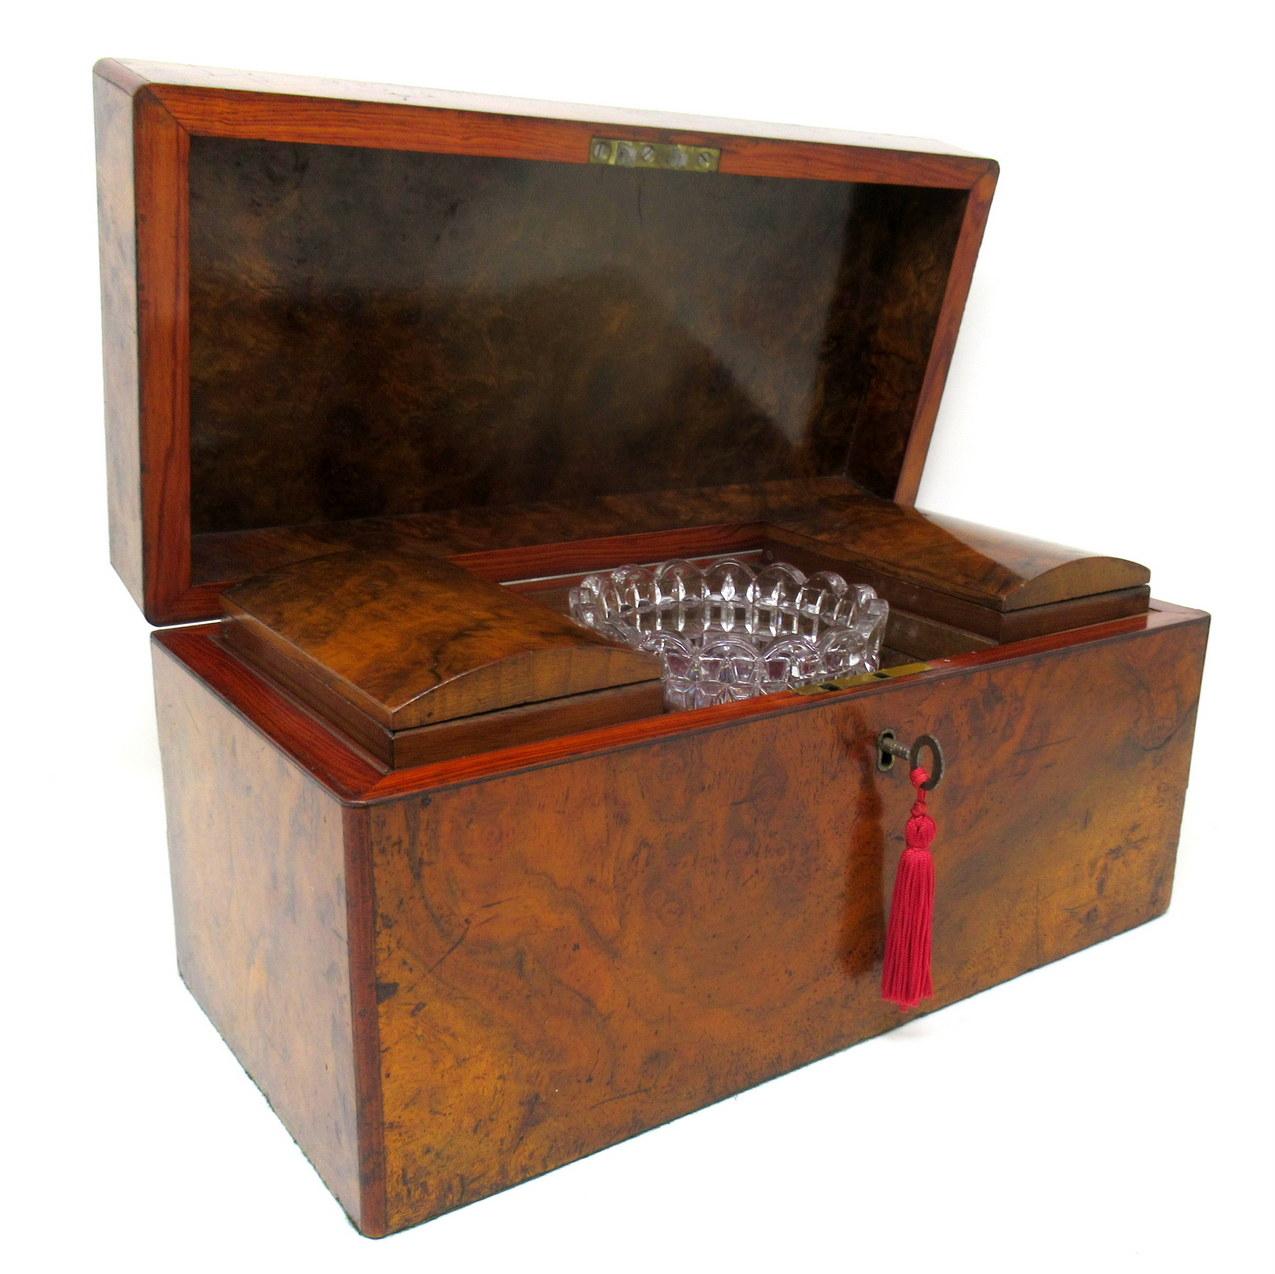 A Superb Example of an English Georgian Period Well figured Burr Walnut Double Interior Section Tea Caddy of flat rectangular outline, generous proportions and outstanding quality, all areas are edged with self-quadrant mouldings, complete with